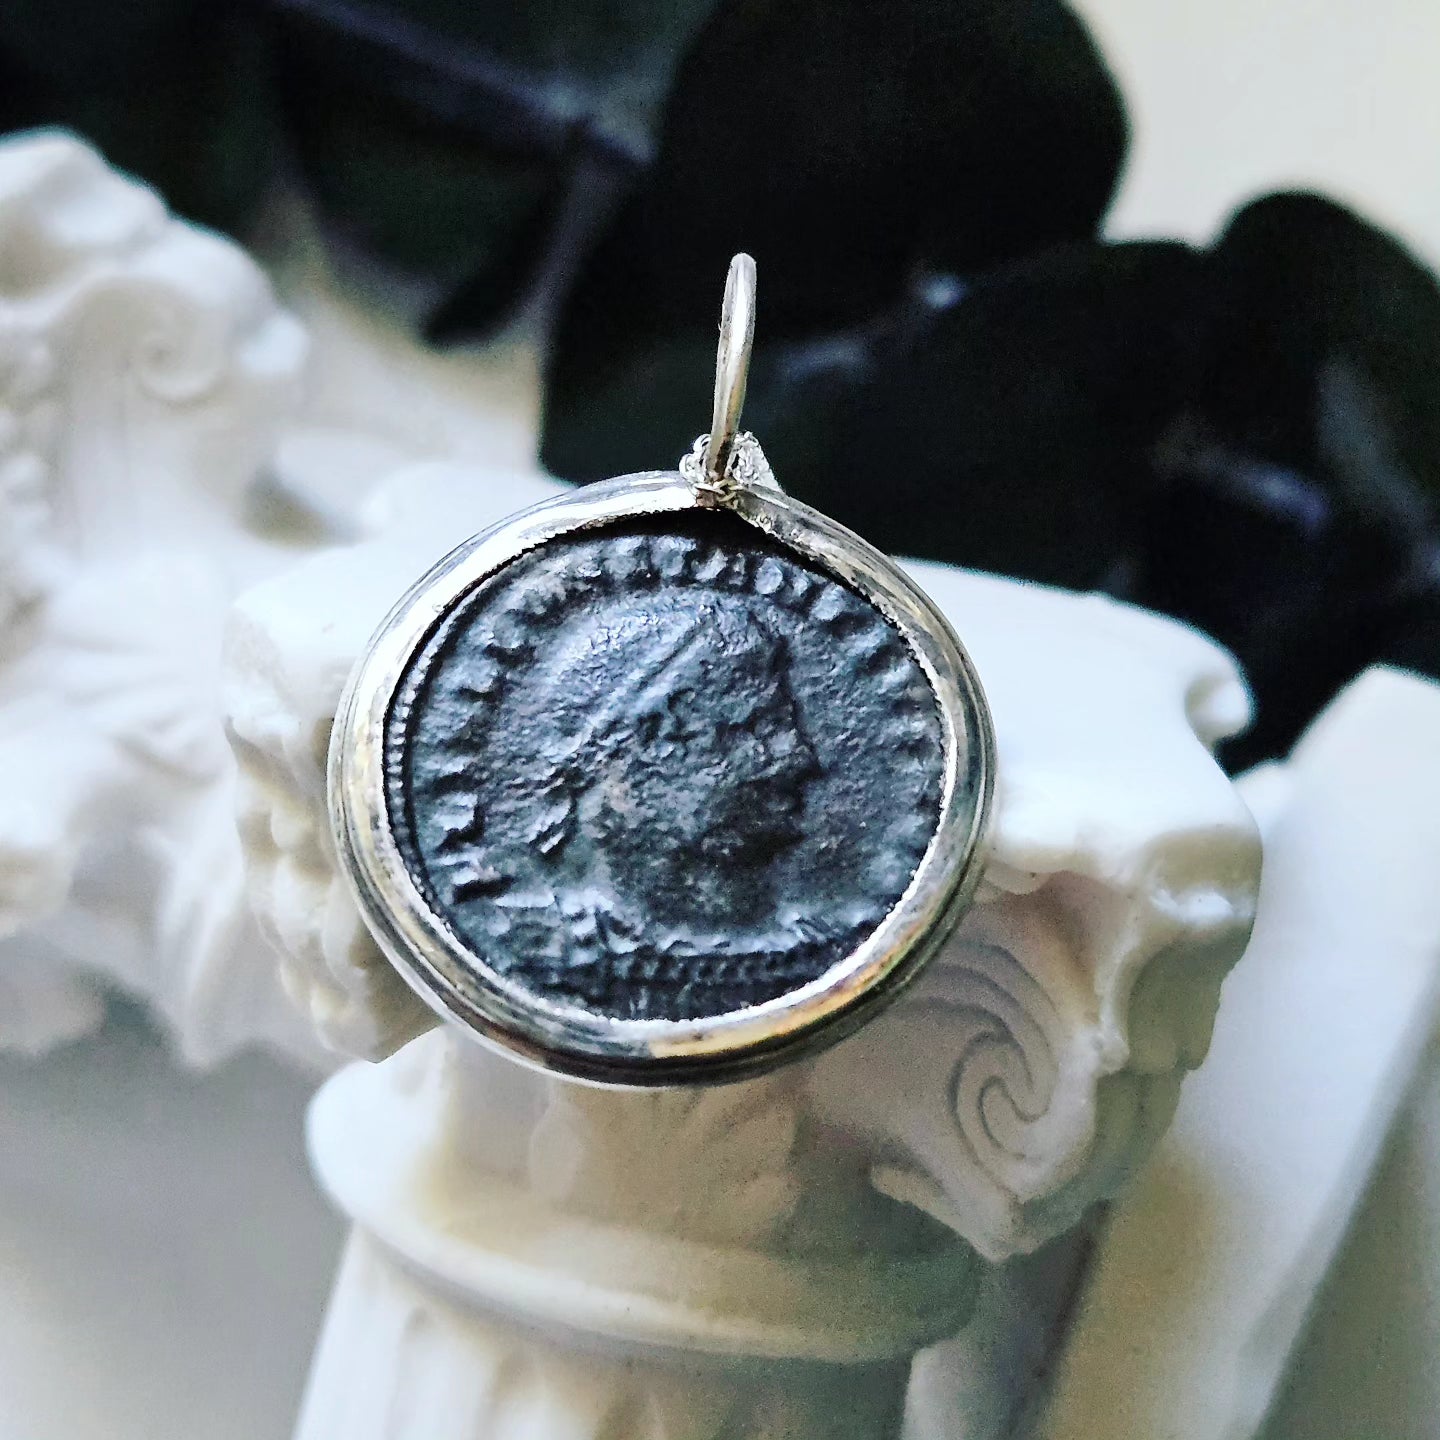 "When in Rome": Ancient Roman Coin Necklace (Constantius II/Soldiers)